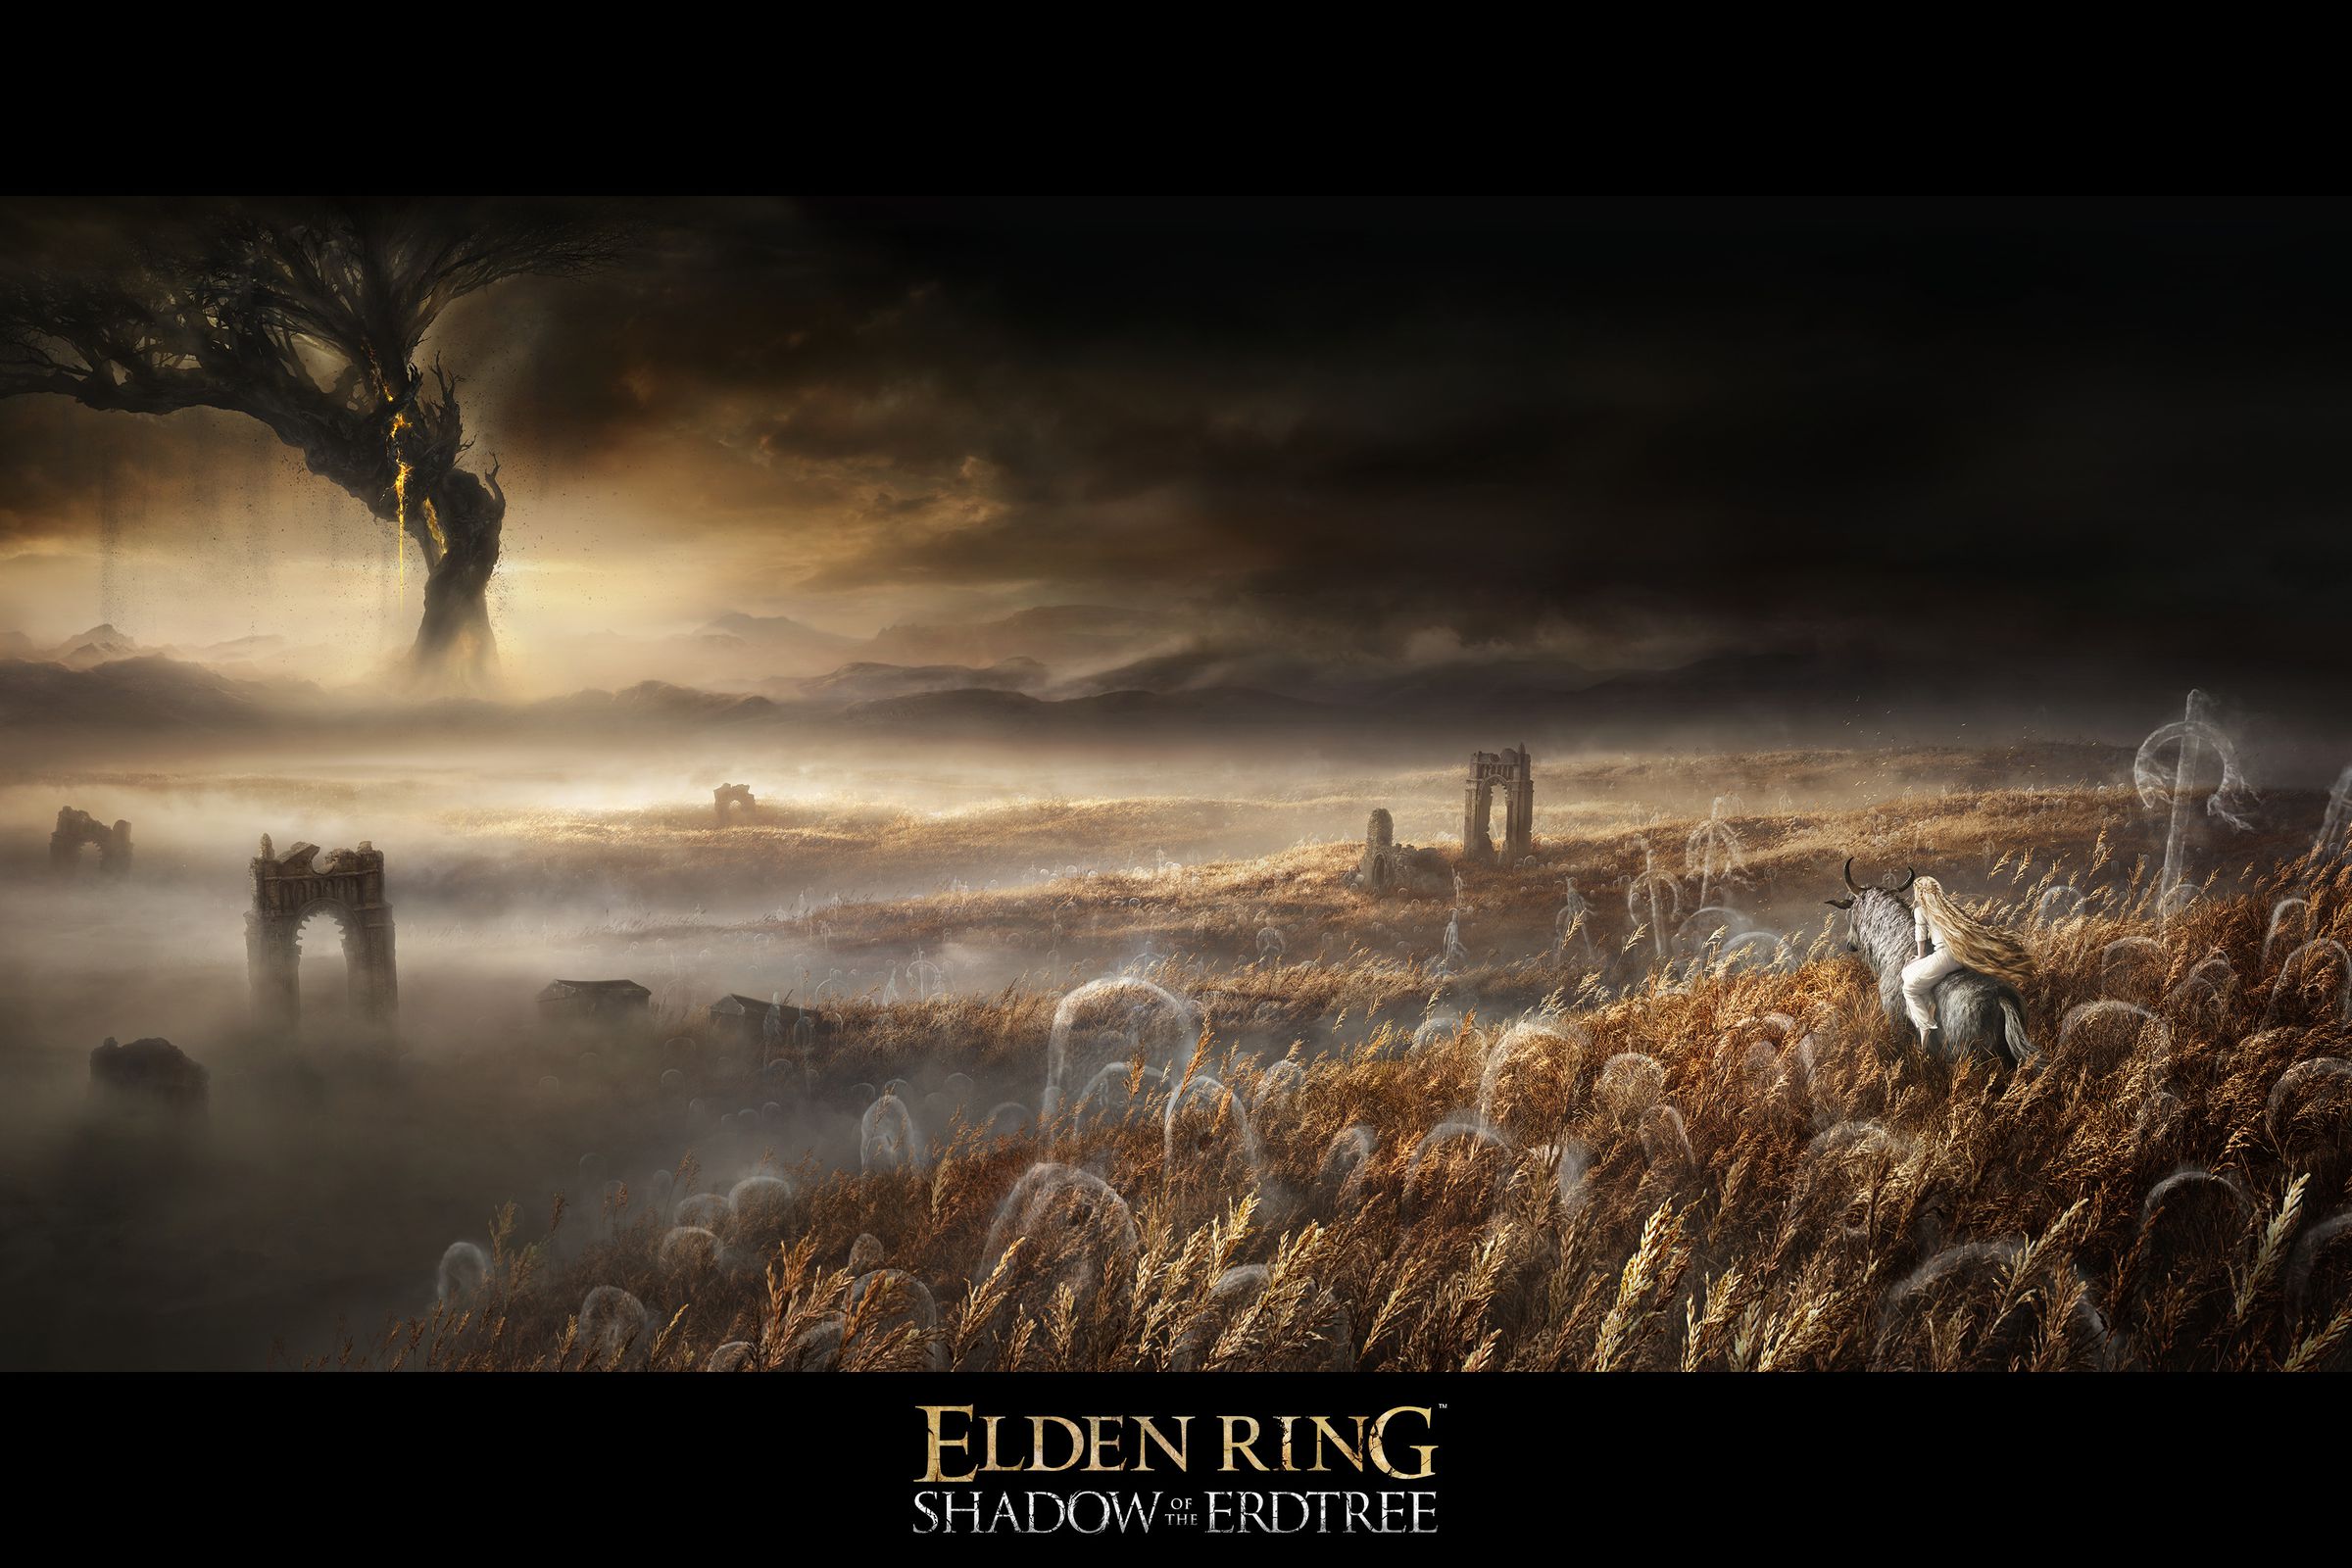 An image showing a golden-haired rider on a spirit steed, looking out over a misty landscape to a huge tree in shadow. 